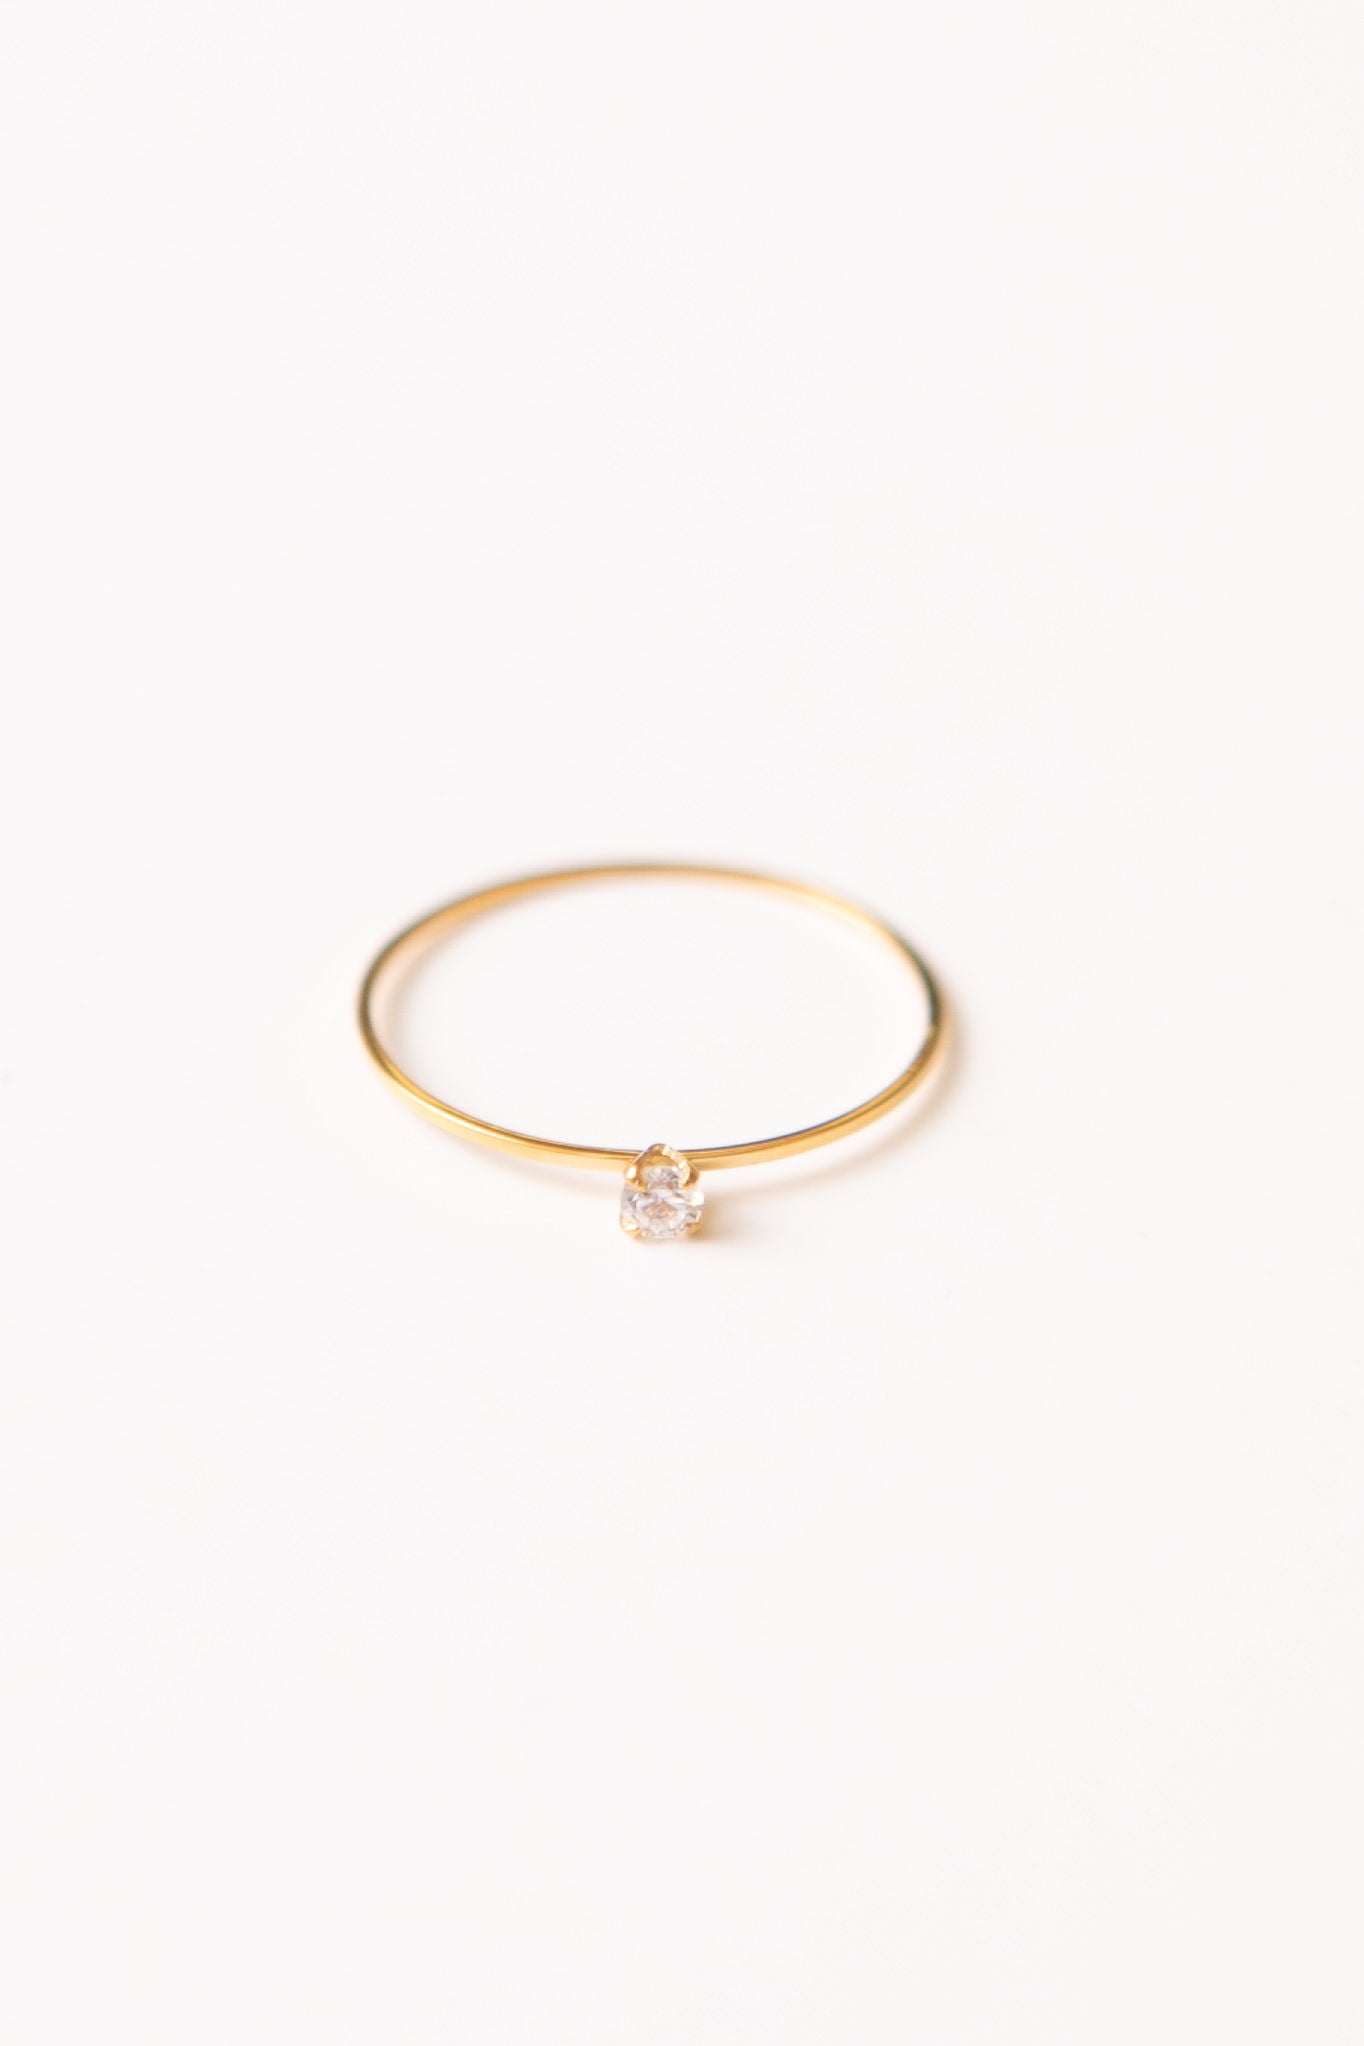 RESTOCKED 9/11 - Ana - Dainty Solitaire Gold Waterproof Band